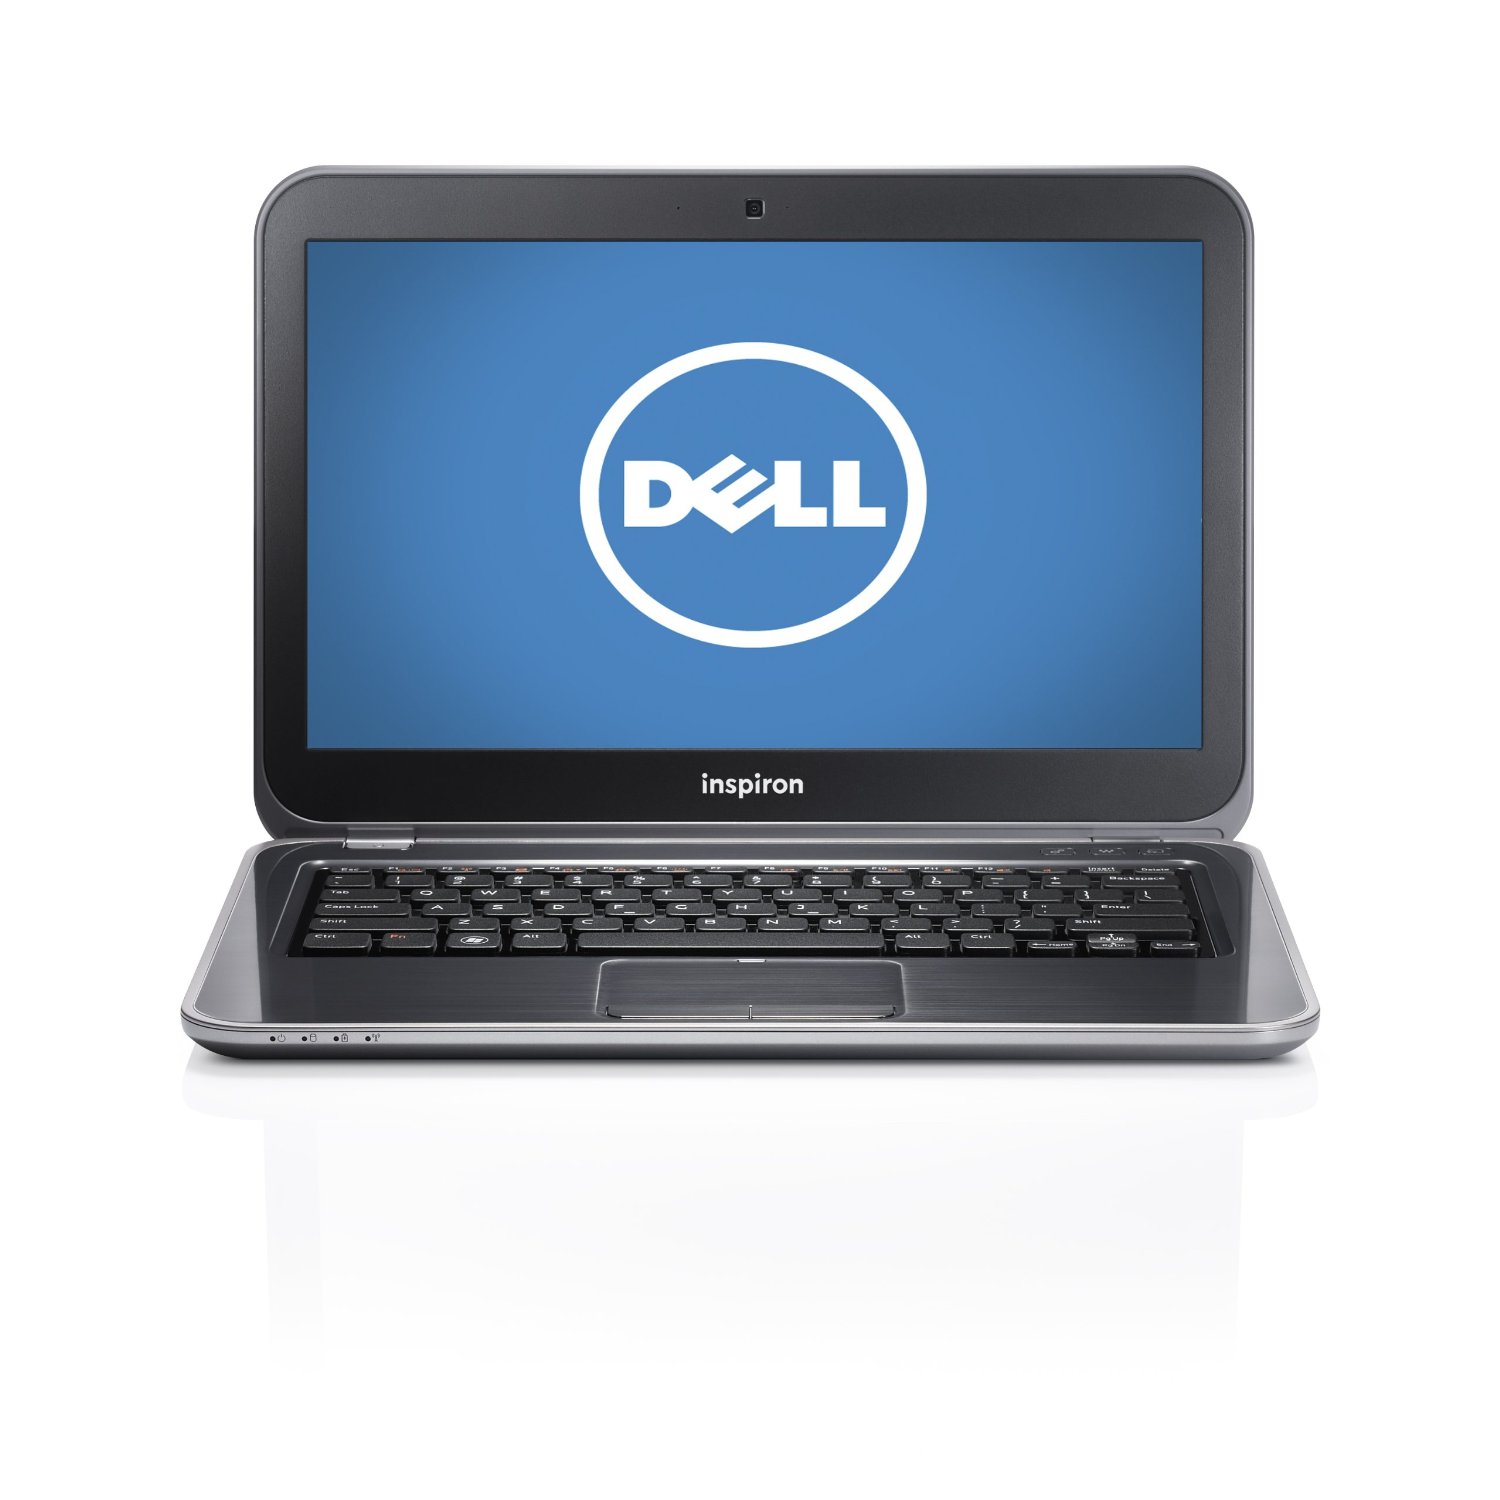 http://thetechjournal.com/wp-content/uploads/images/1210/1349897573-dell-inspiron-13z-13inch-laptop-1.jpg